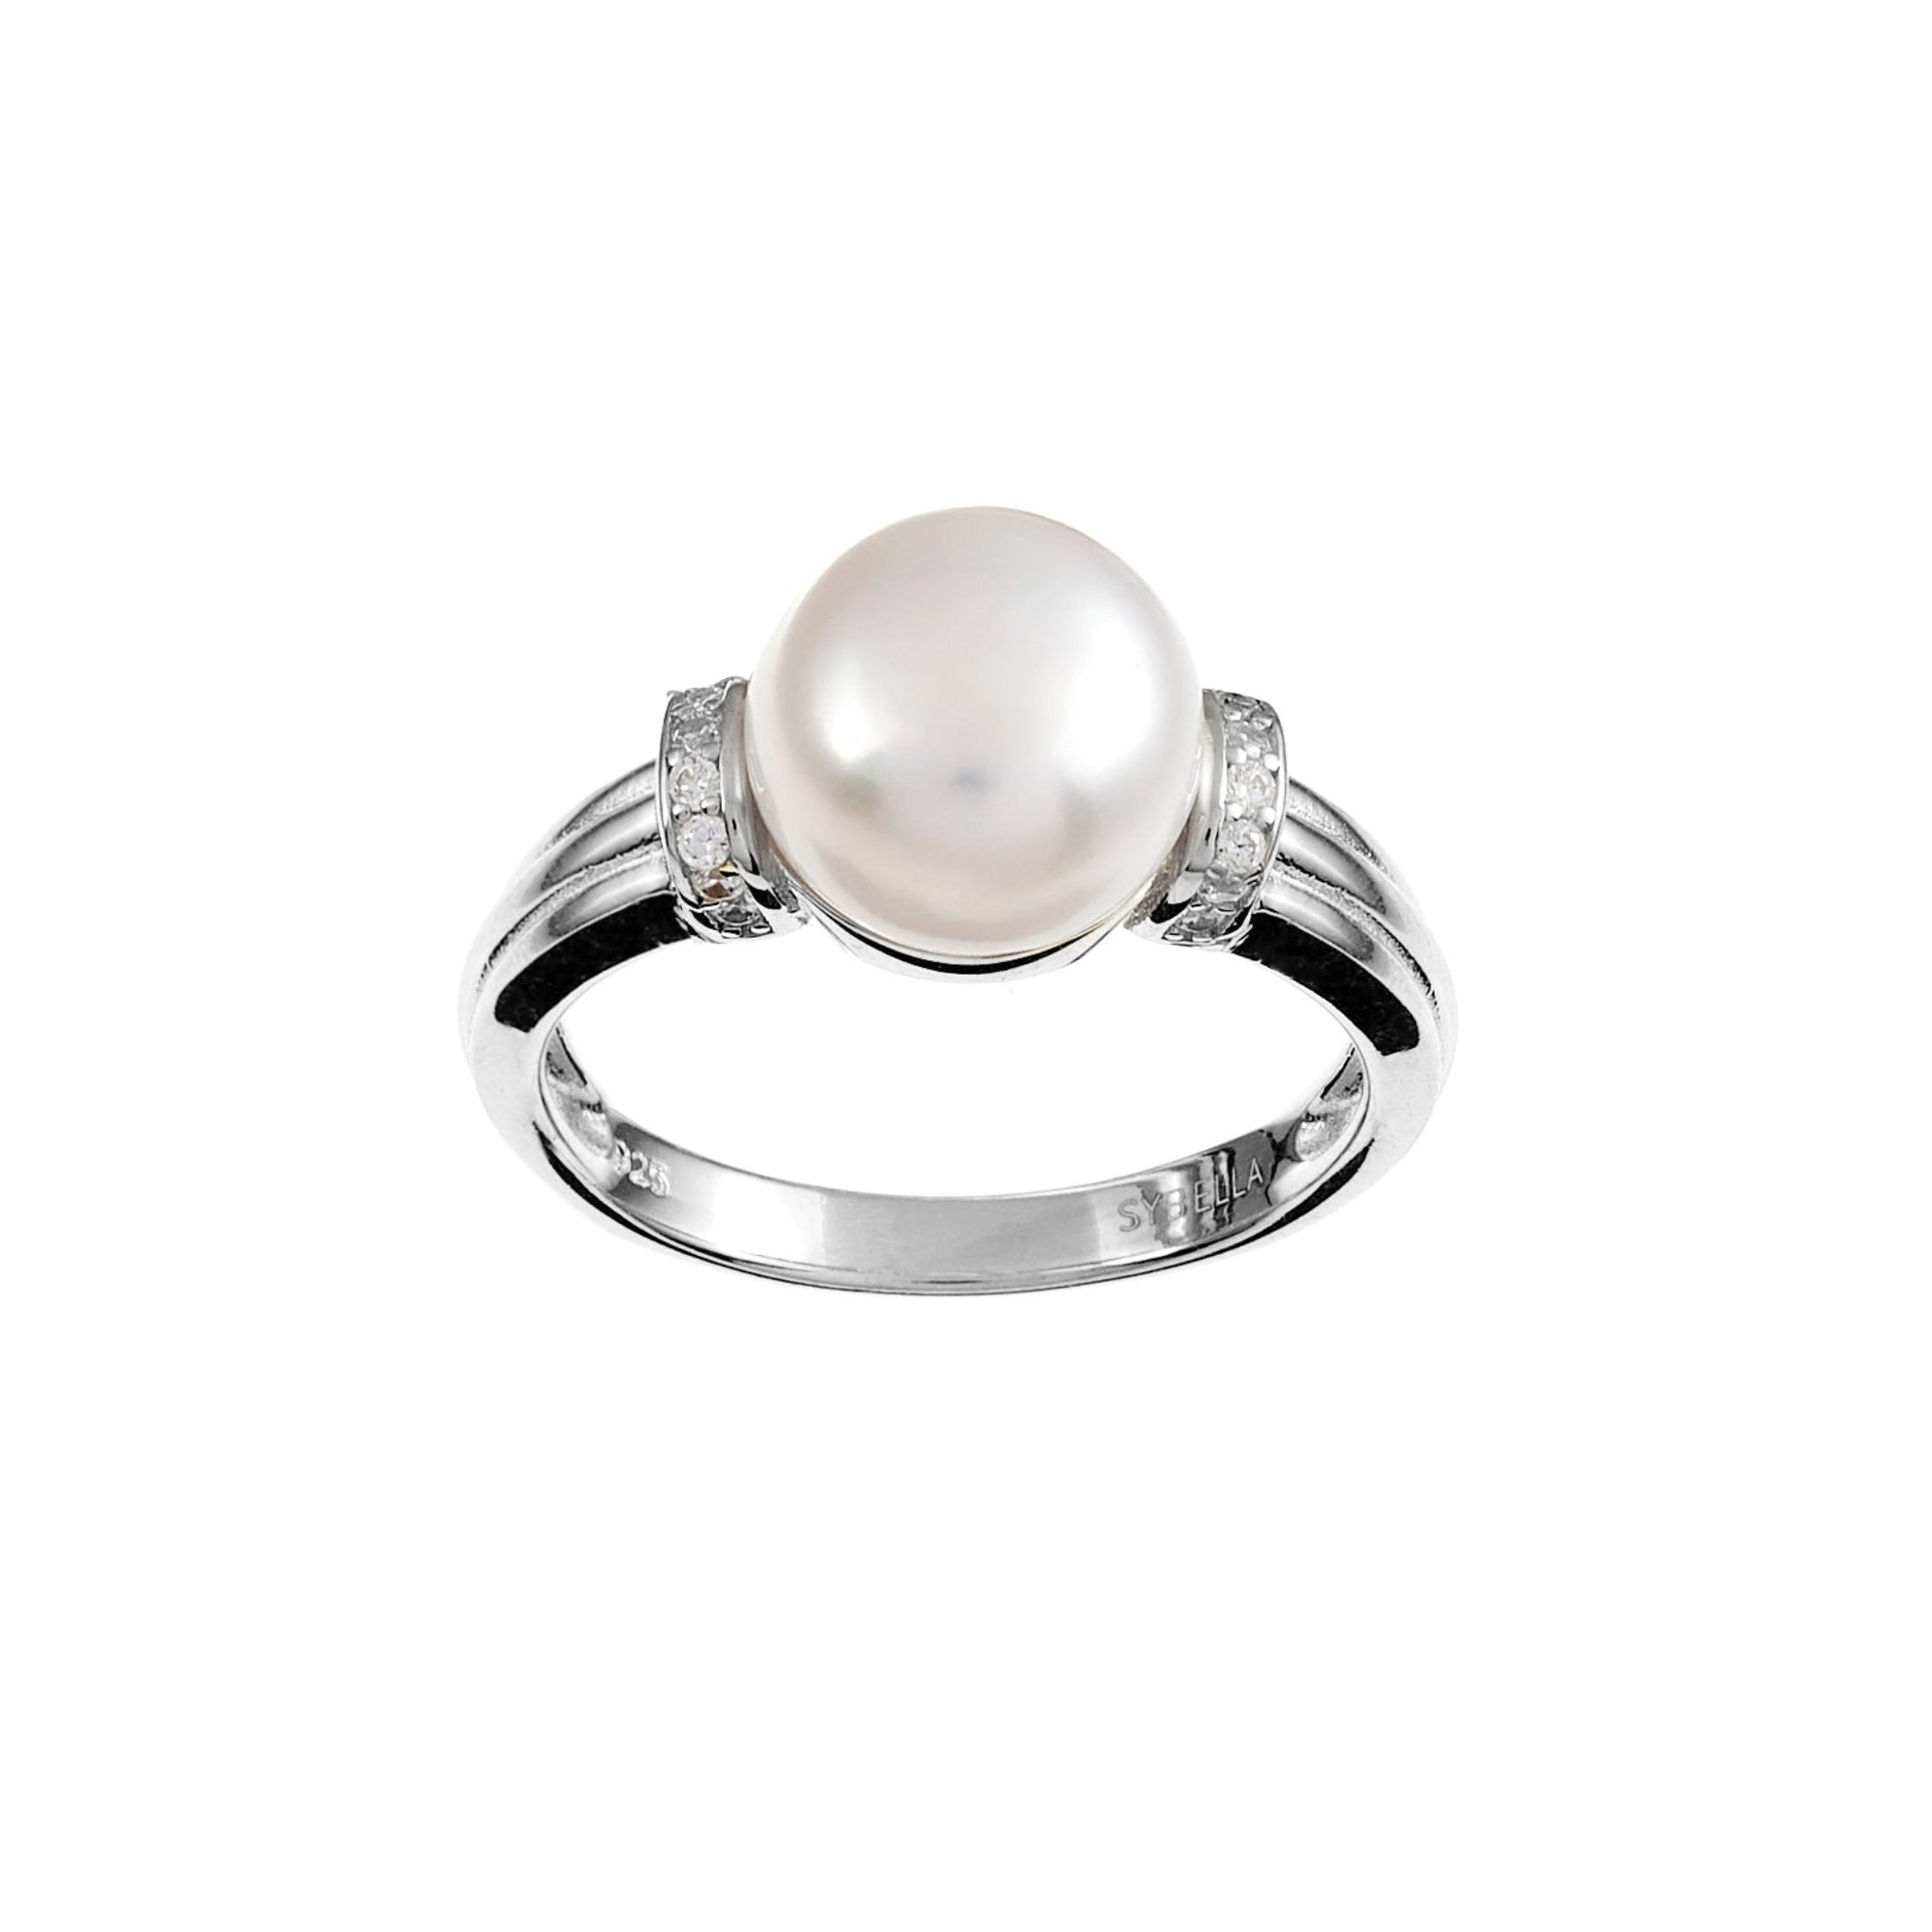 Sybella Autumn Pearl Gold or Silver Ring